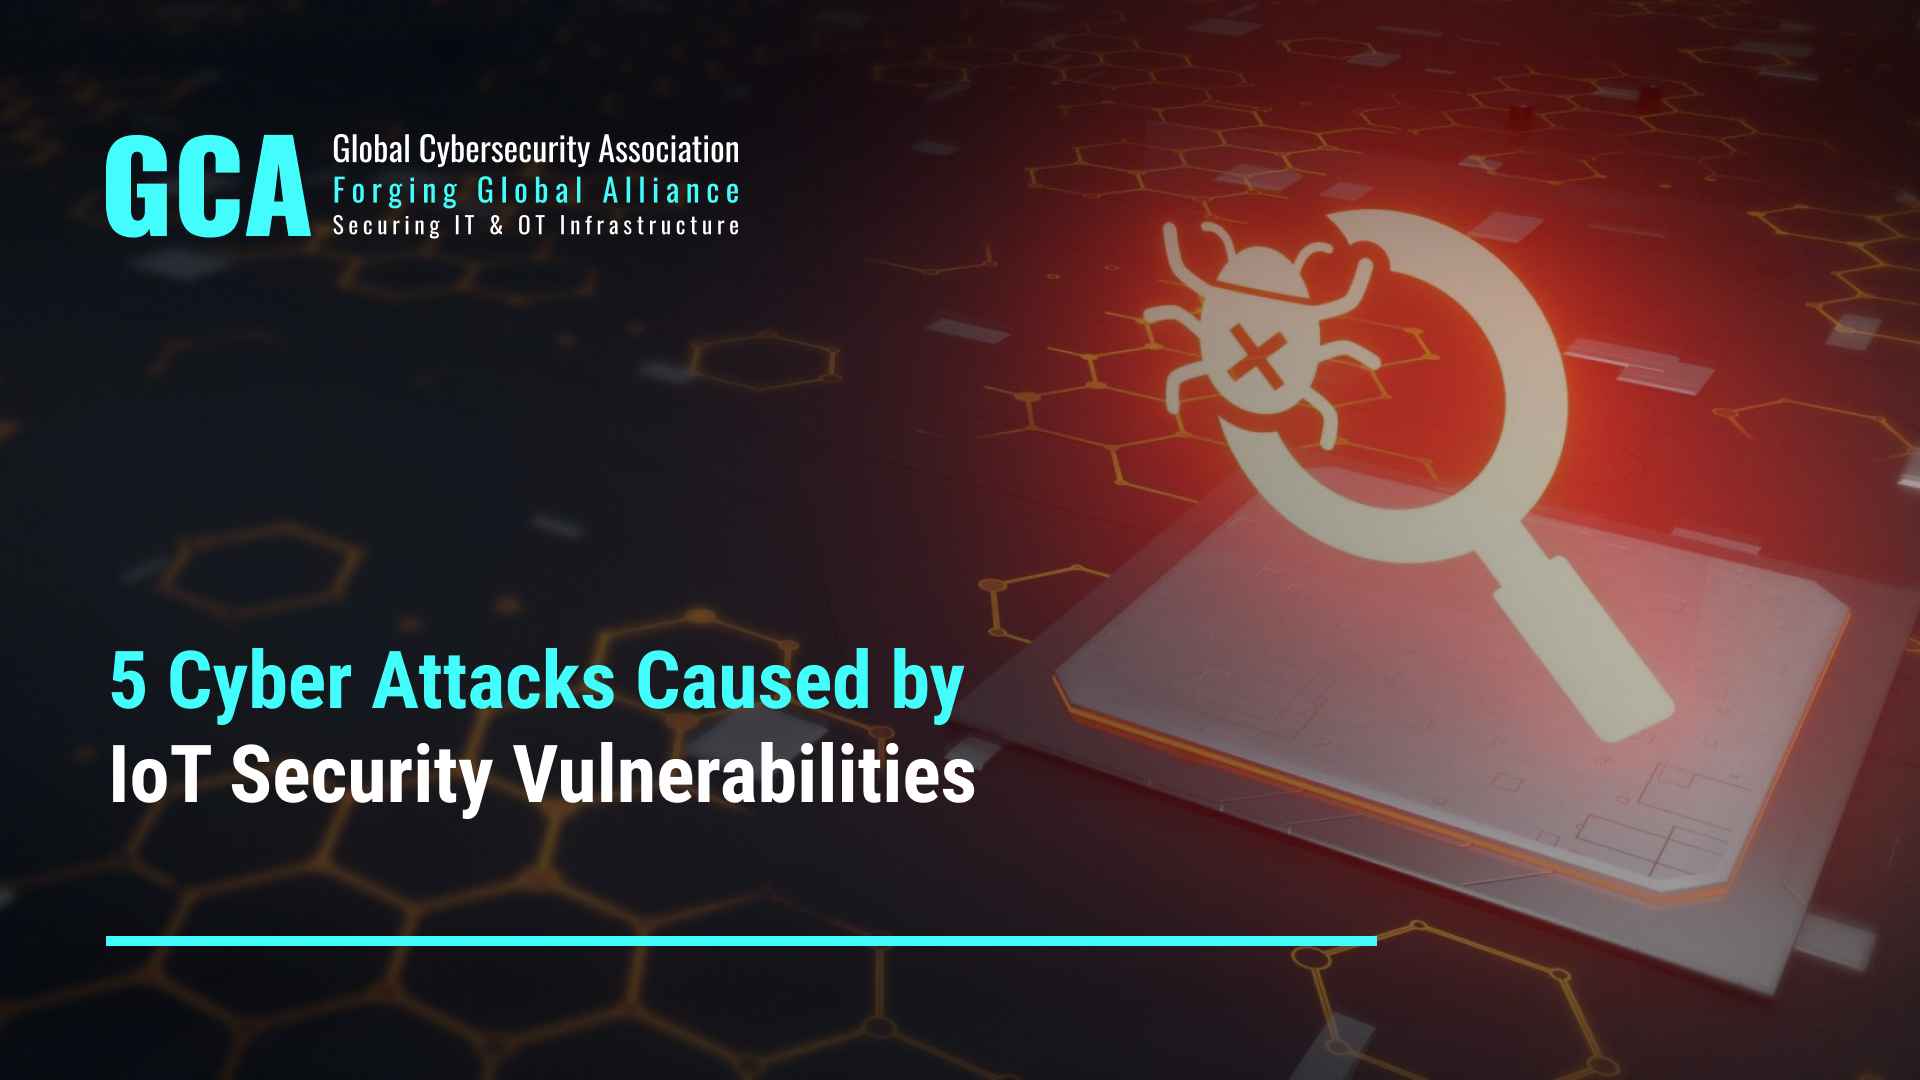 5 Cyber Attacks Caused by IoT Security Vulnerabilities